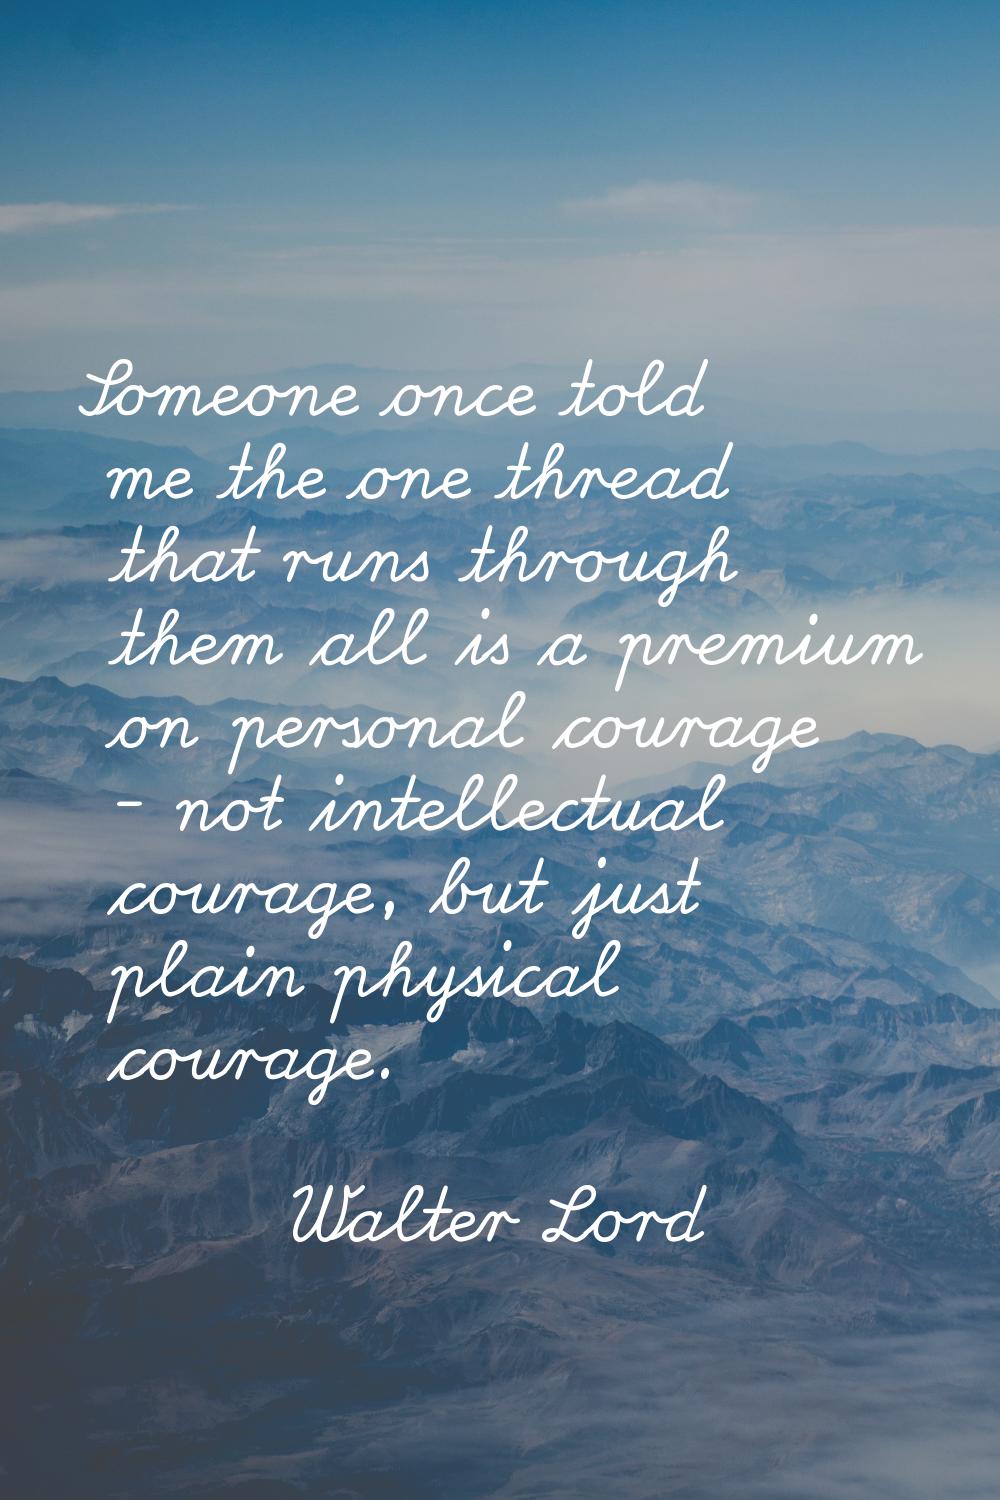 Someone once told me the one thread that runs through them all is a premium on personal courage - n